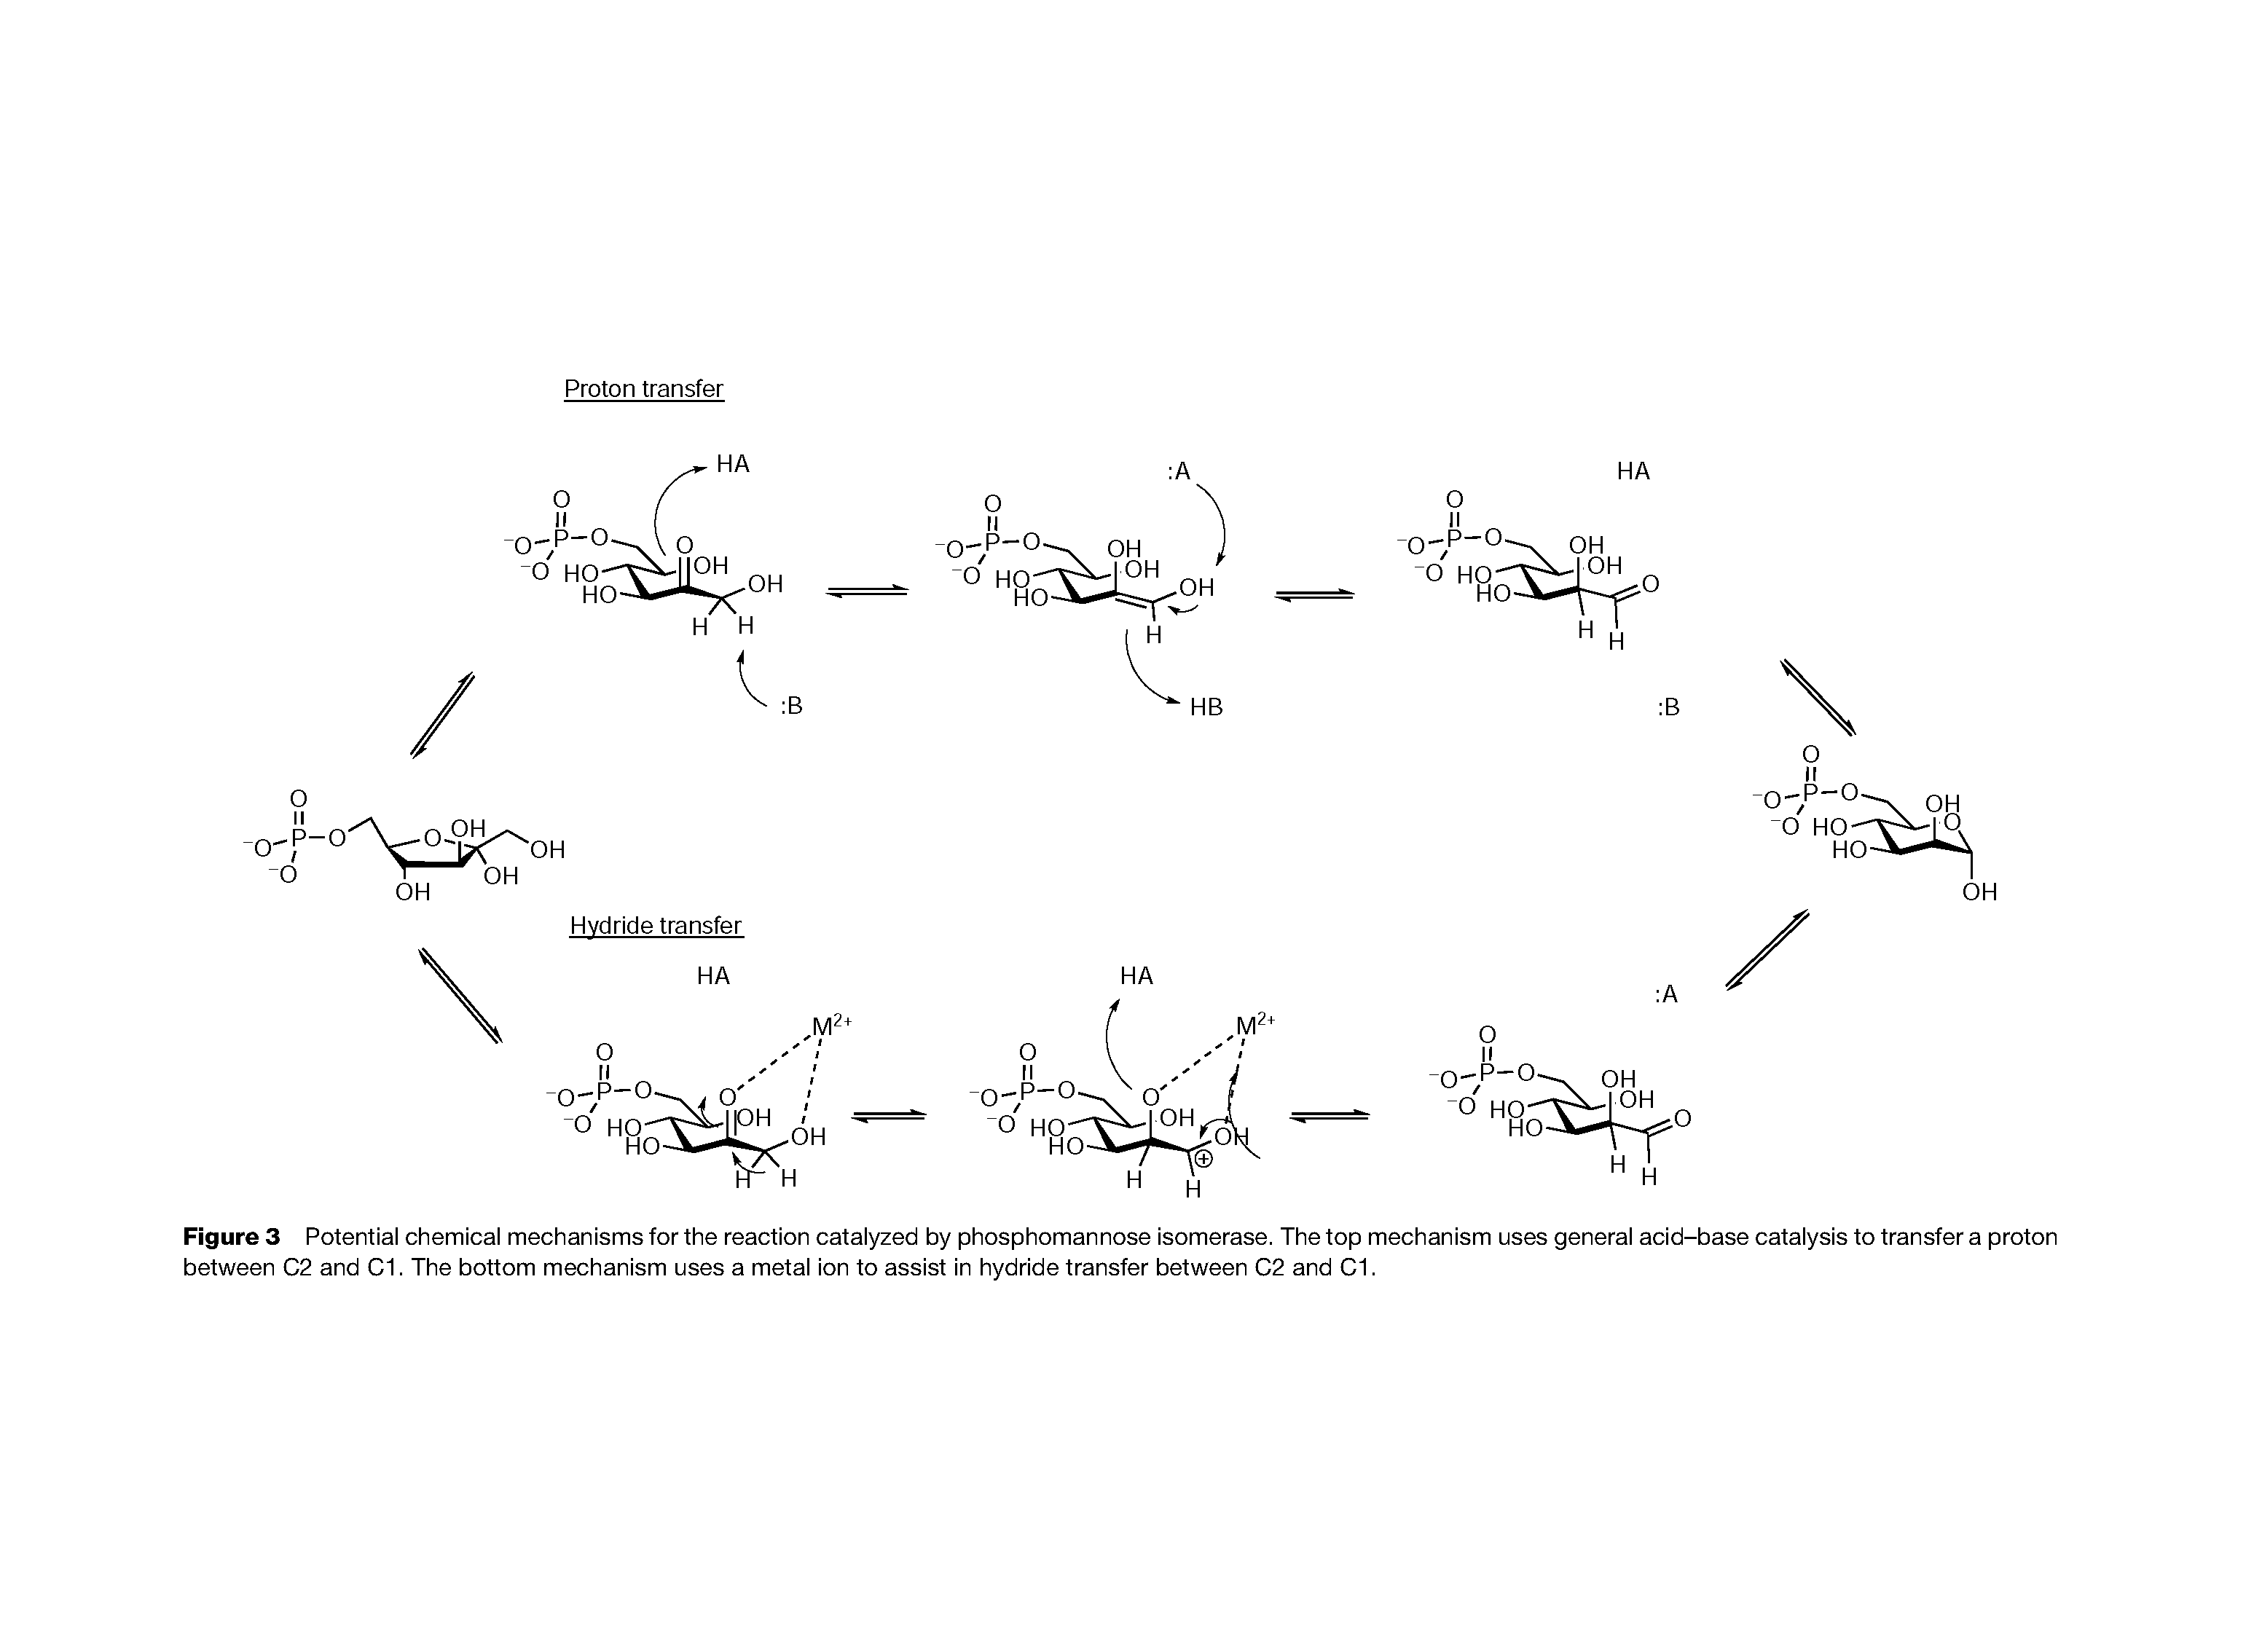 Figure 3 Potential chemical mechanisms for the reaction catalyzed by phosphomannose isomerase. The top mechanism uses general acid-base catalysis to transfer a proton between C2 and C1. The bottom mechanism uses a metal ion to assist in hydride transfer between C2 and C1.